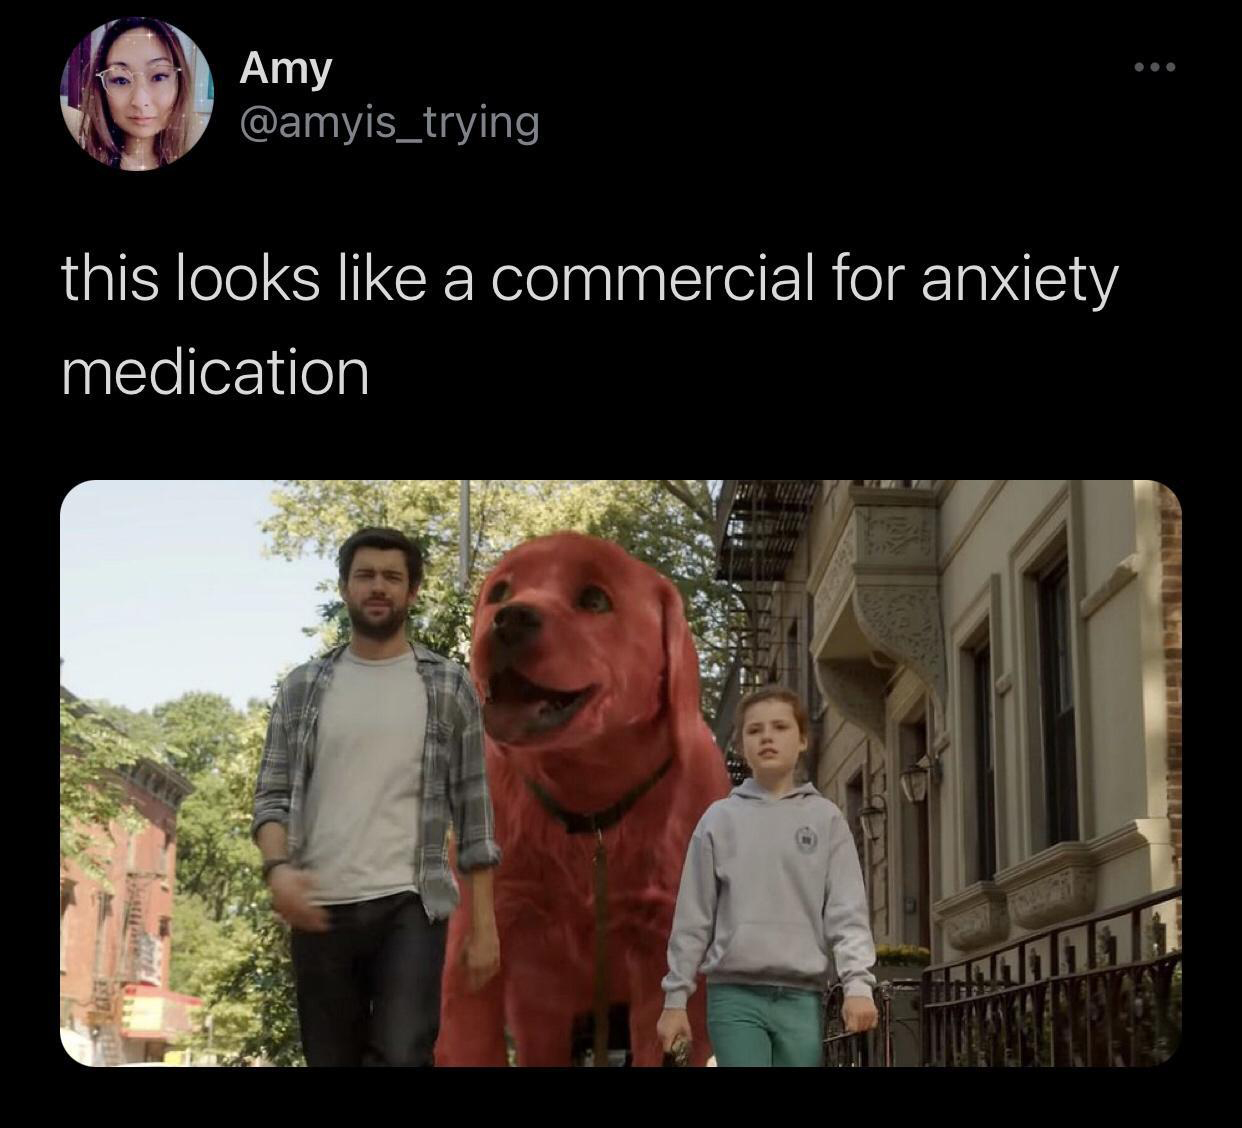 funny tweets and replies on twitter - live action clifford - Amy this looks a commercial for anxiety medication